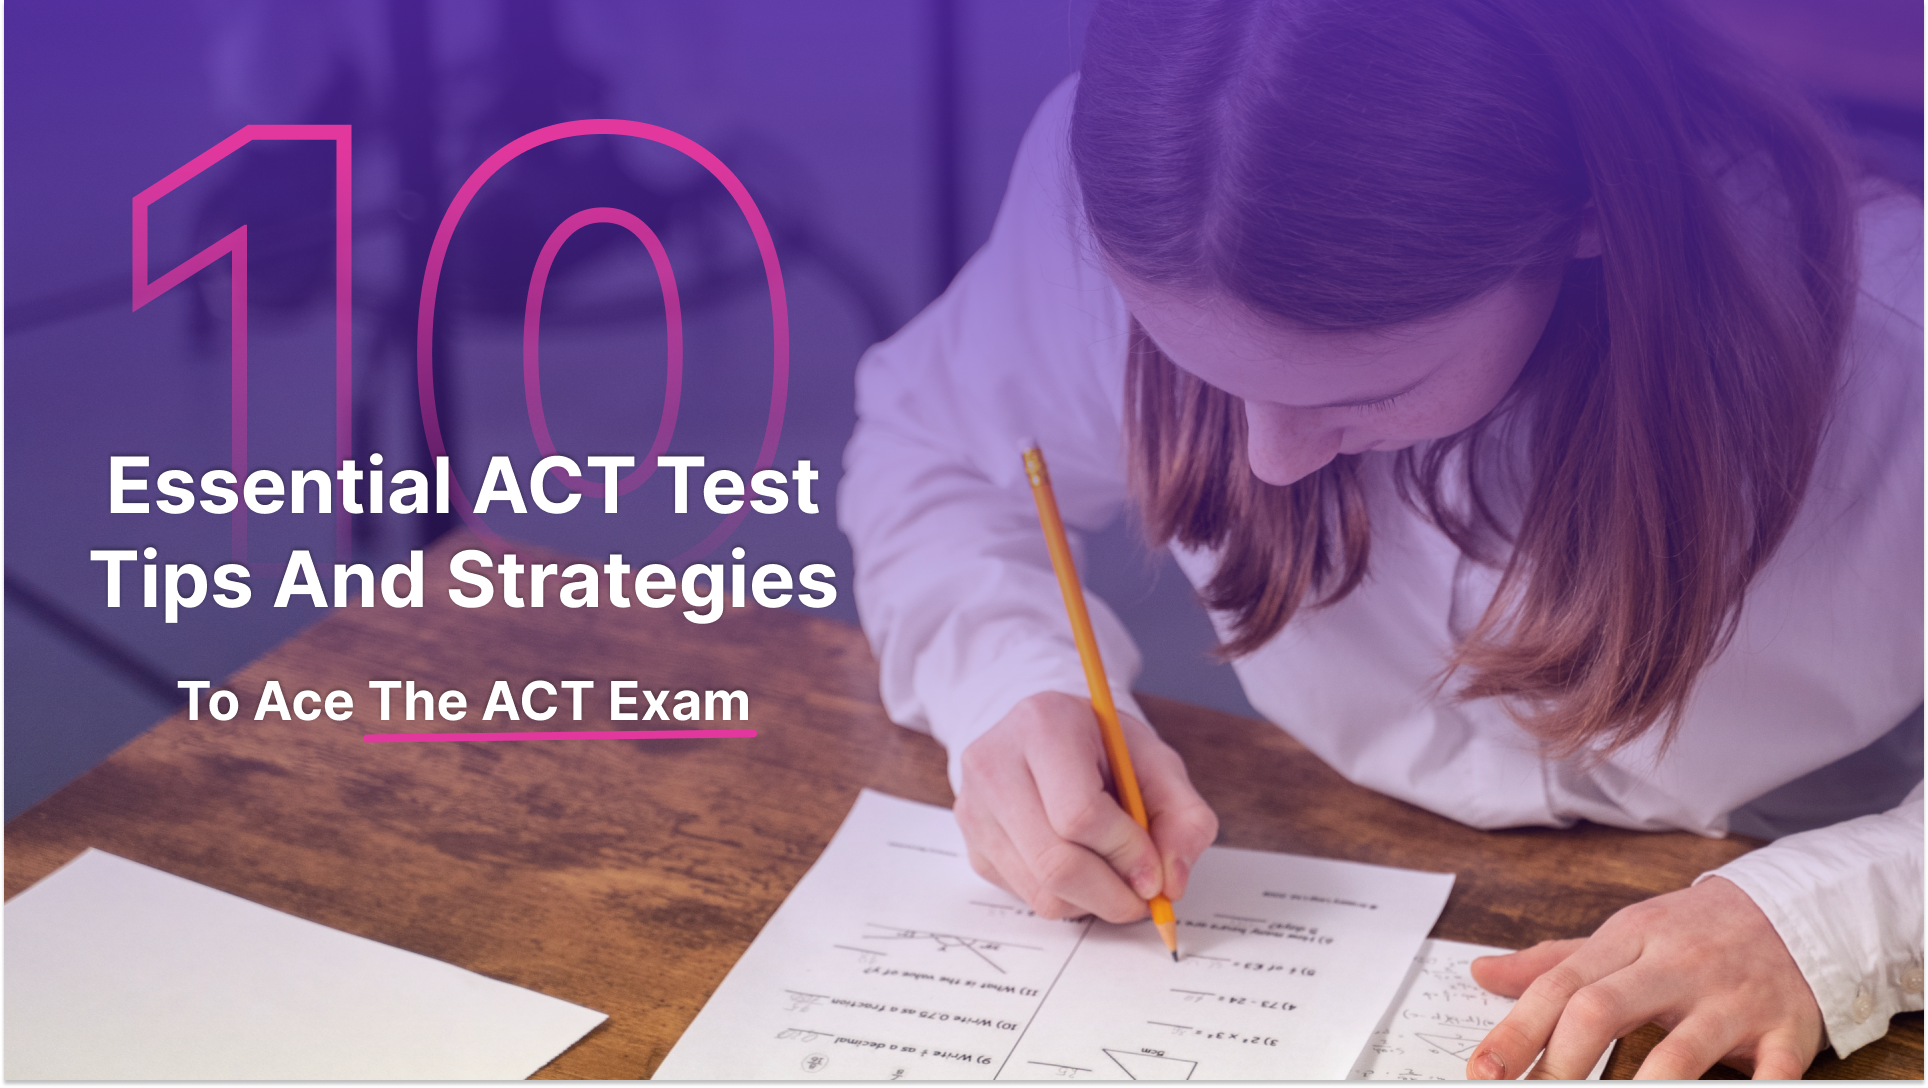 10 Essential ACT Test Tips and Strategies to Ace the ACT Exam